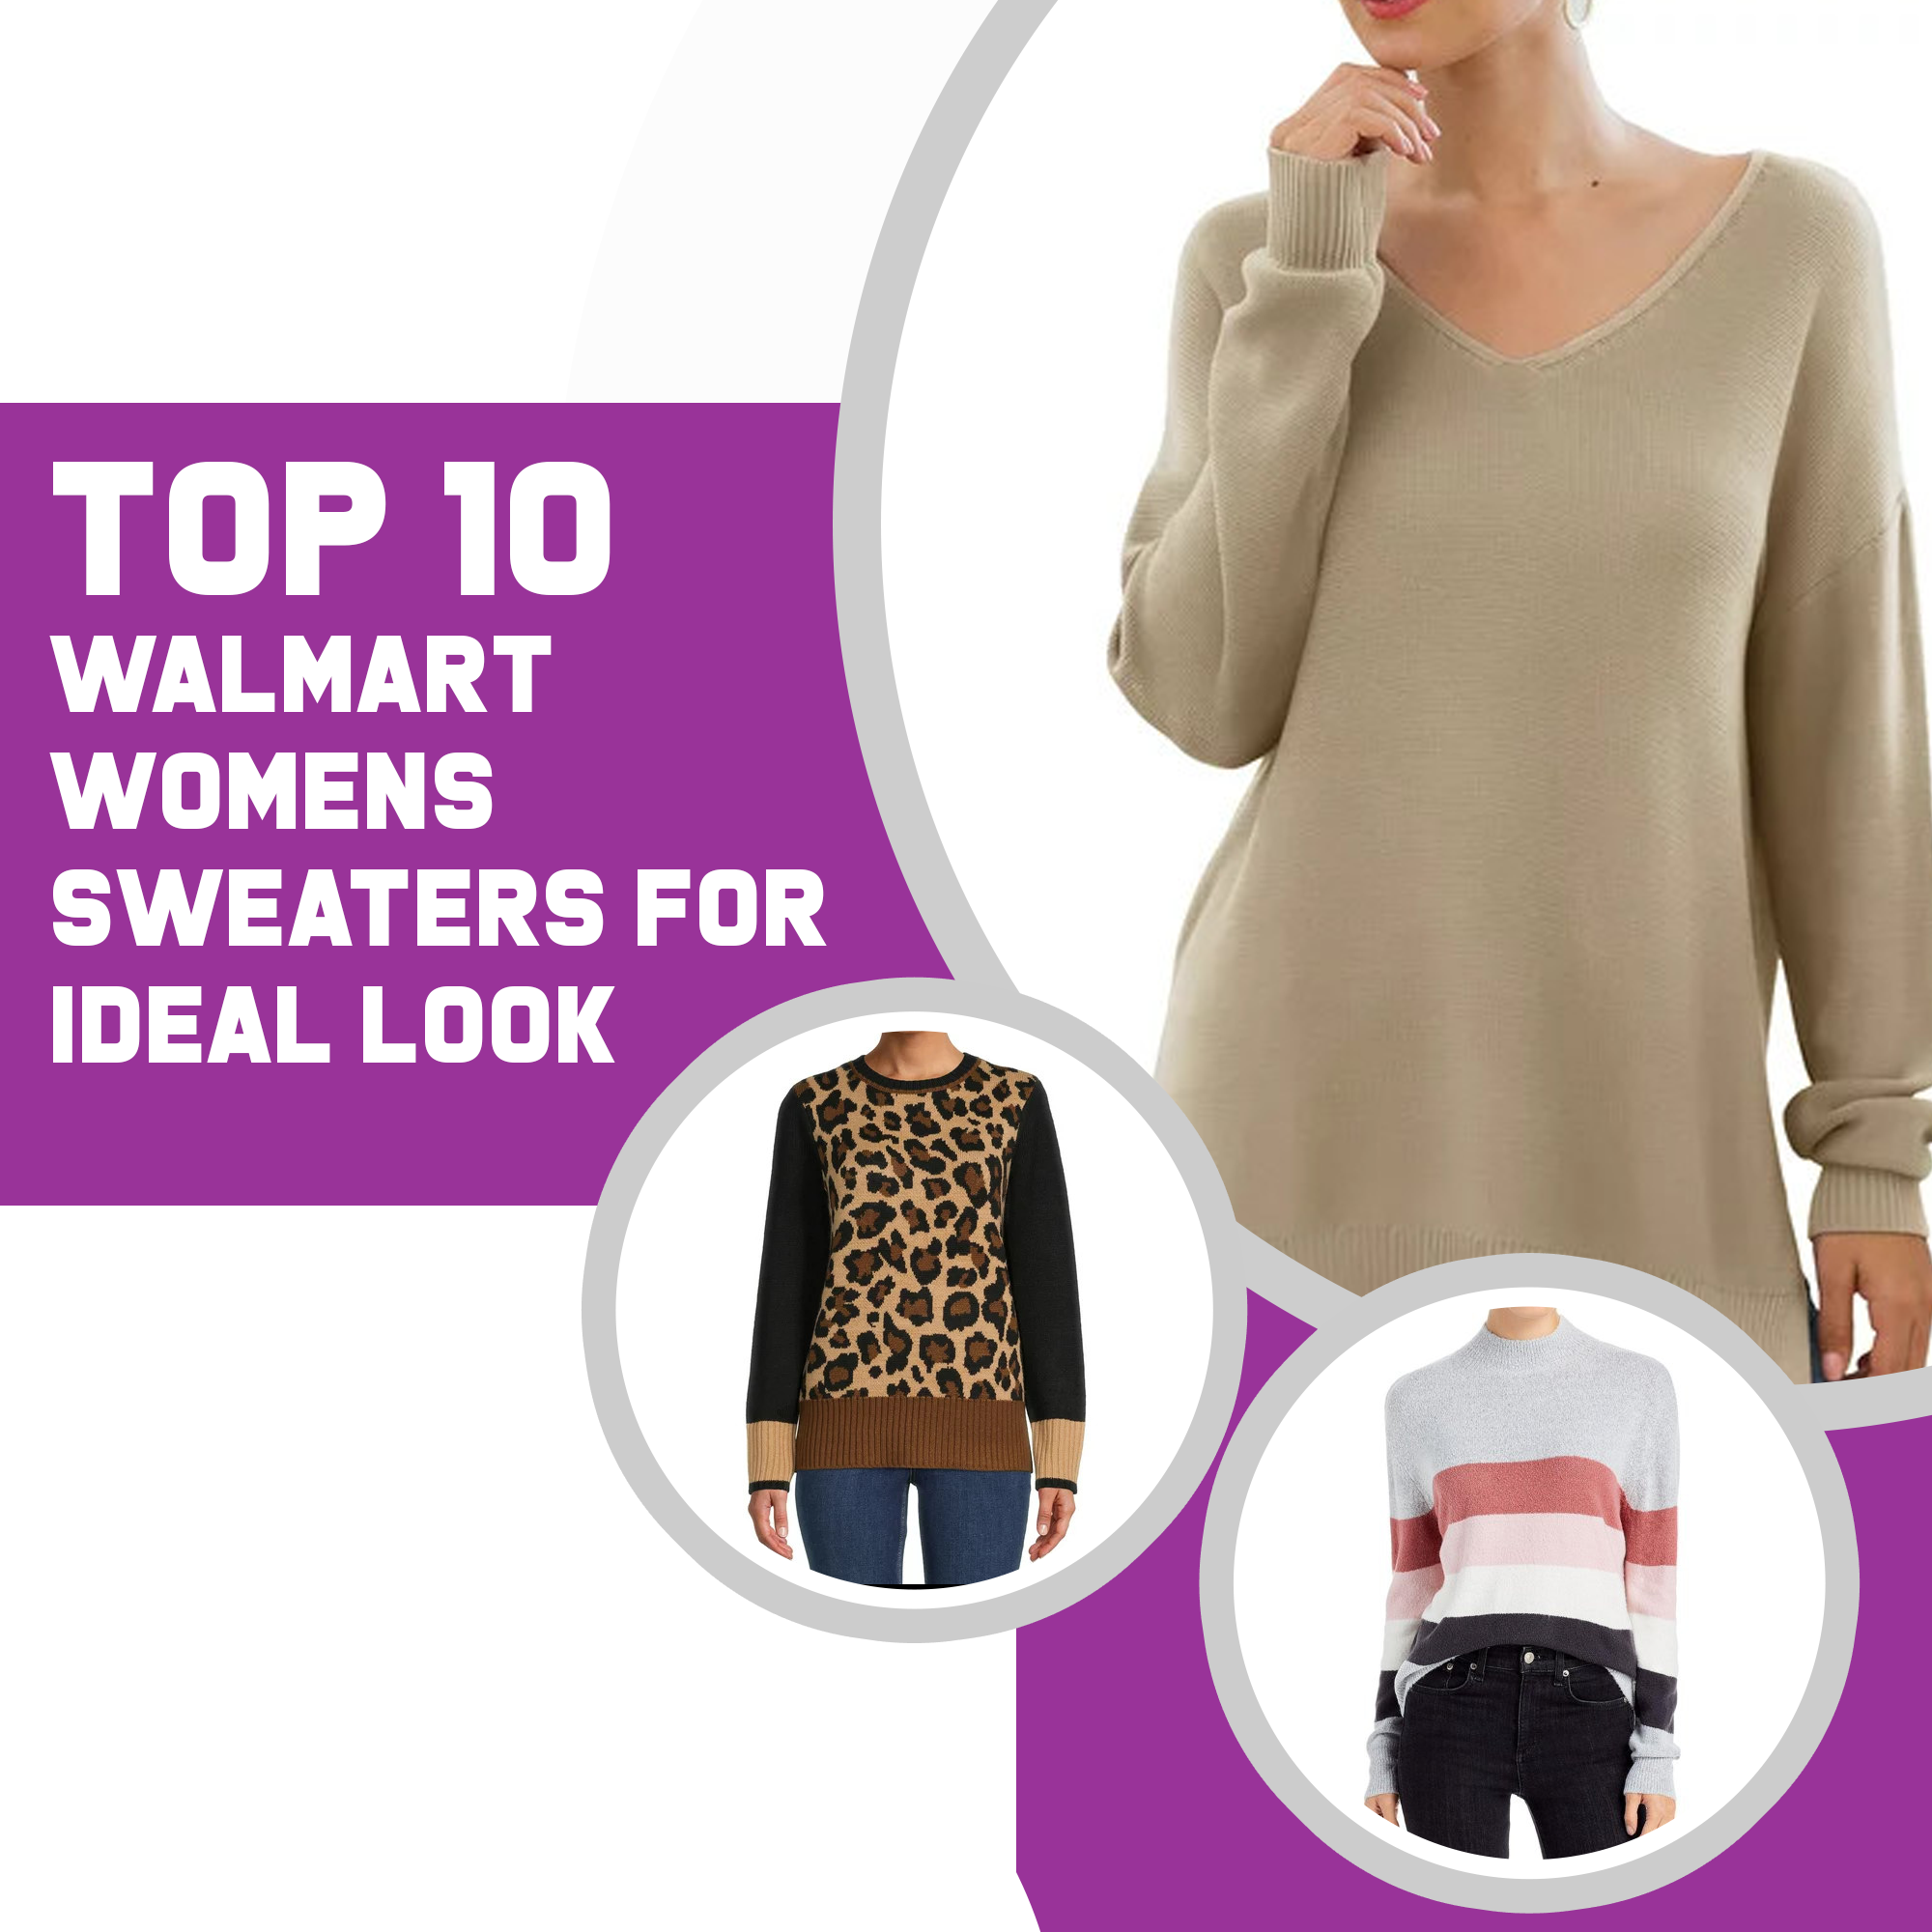 Top 10 Walmart Womens Sweaters For Ideal Look